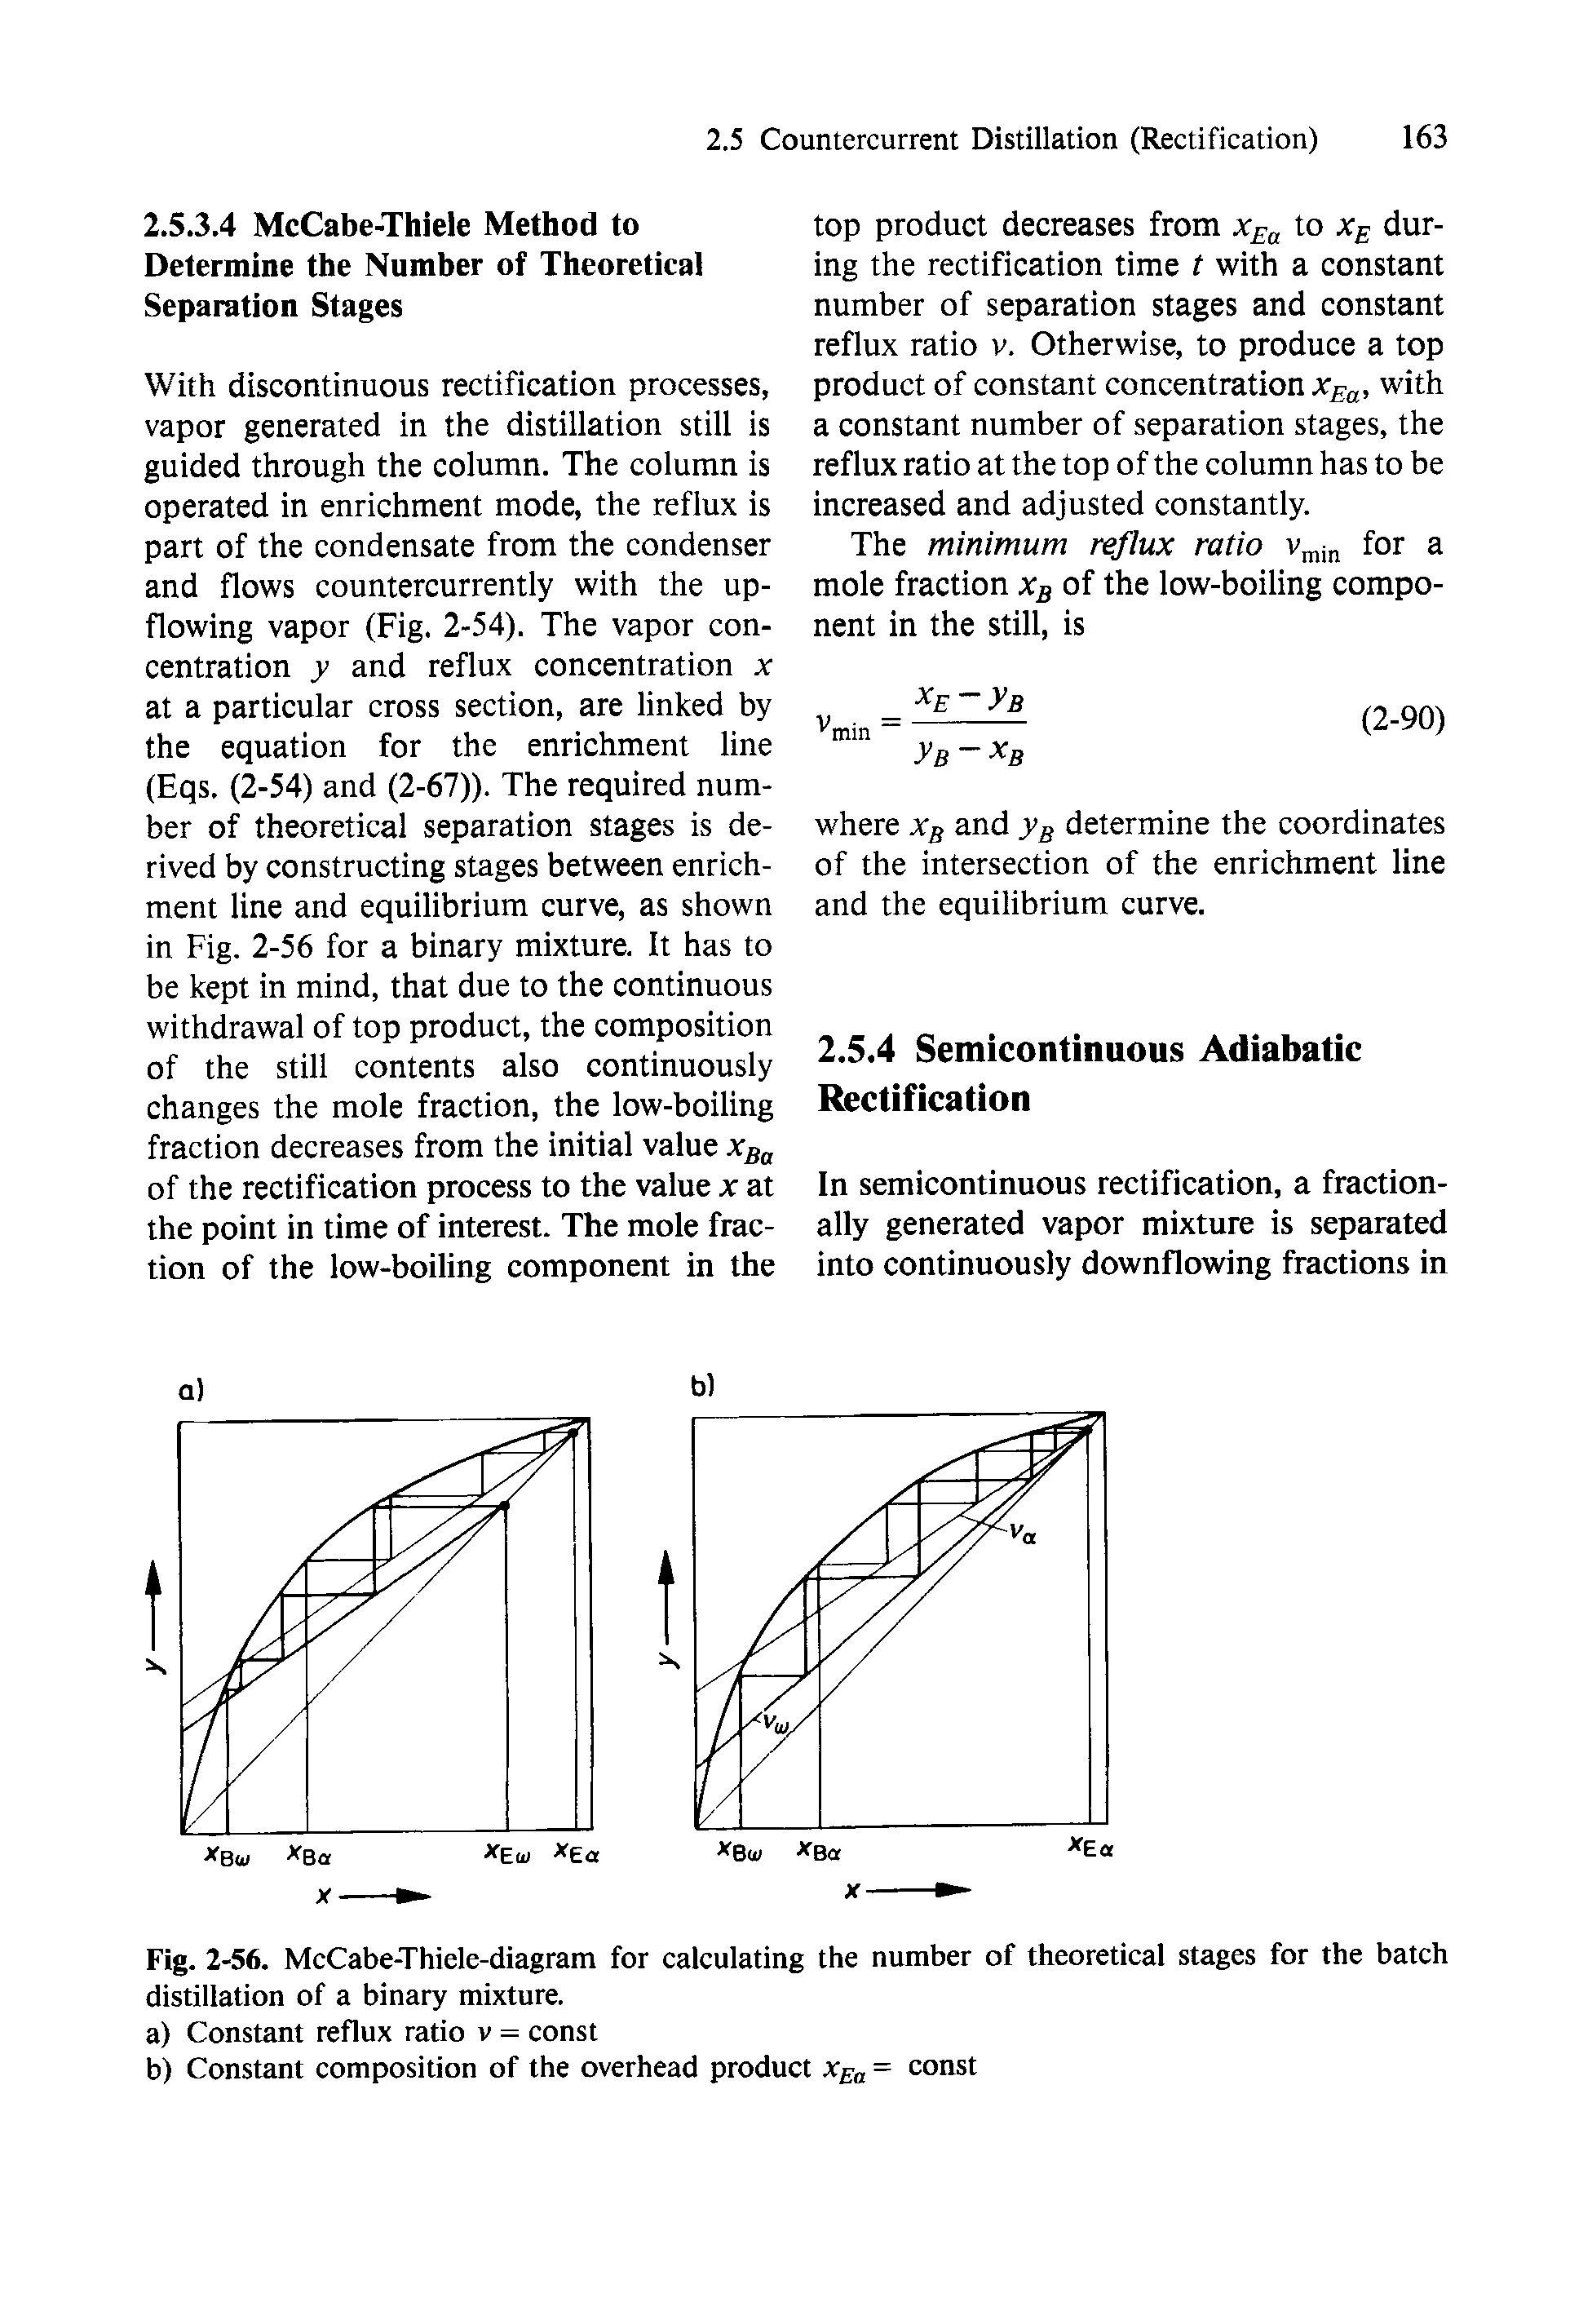 Fig. 2-56. McCabe-Thiele-diagram for calculating the number of theoretical stages for the batch distillation of a binary mixture.